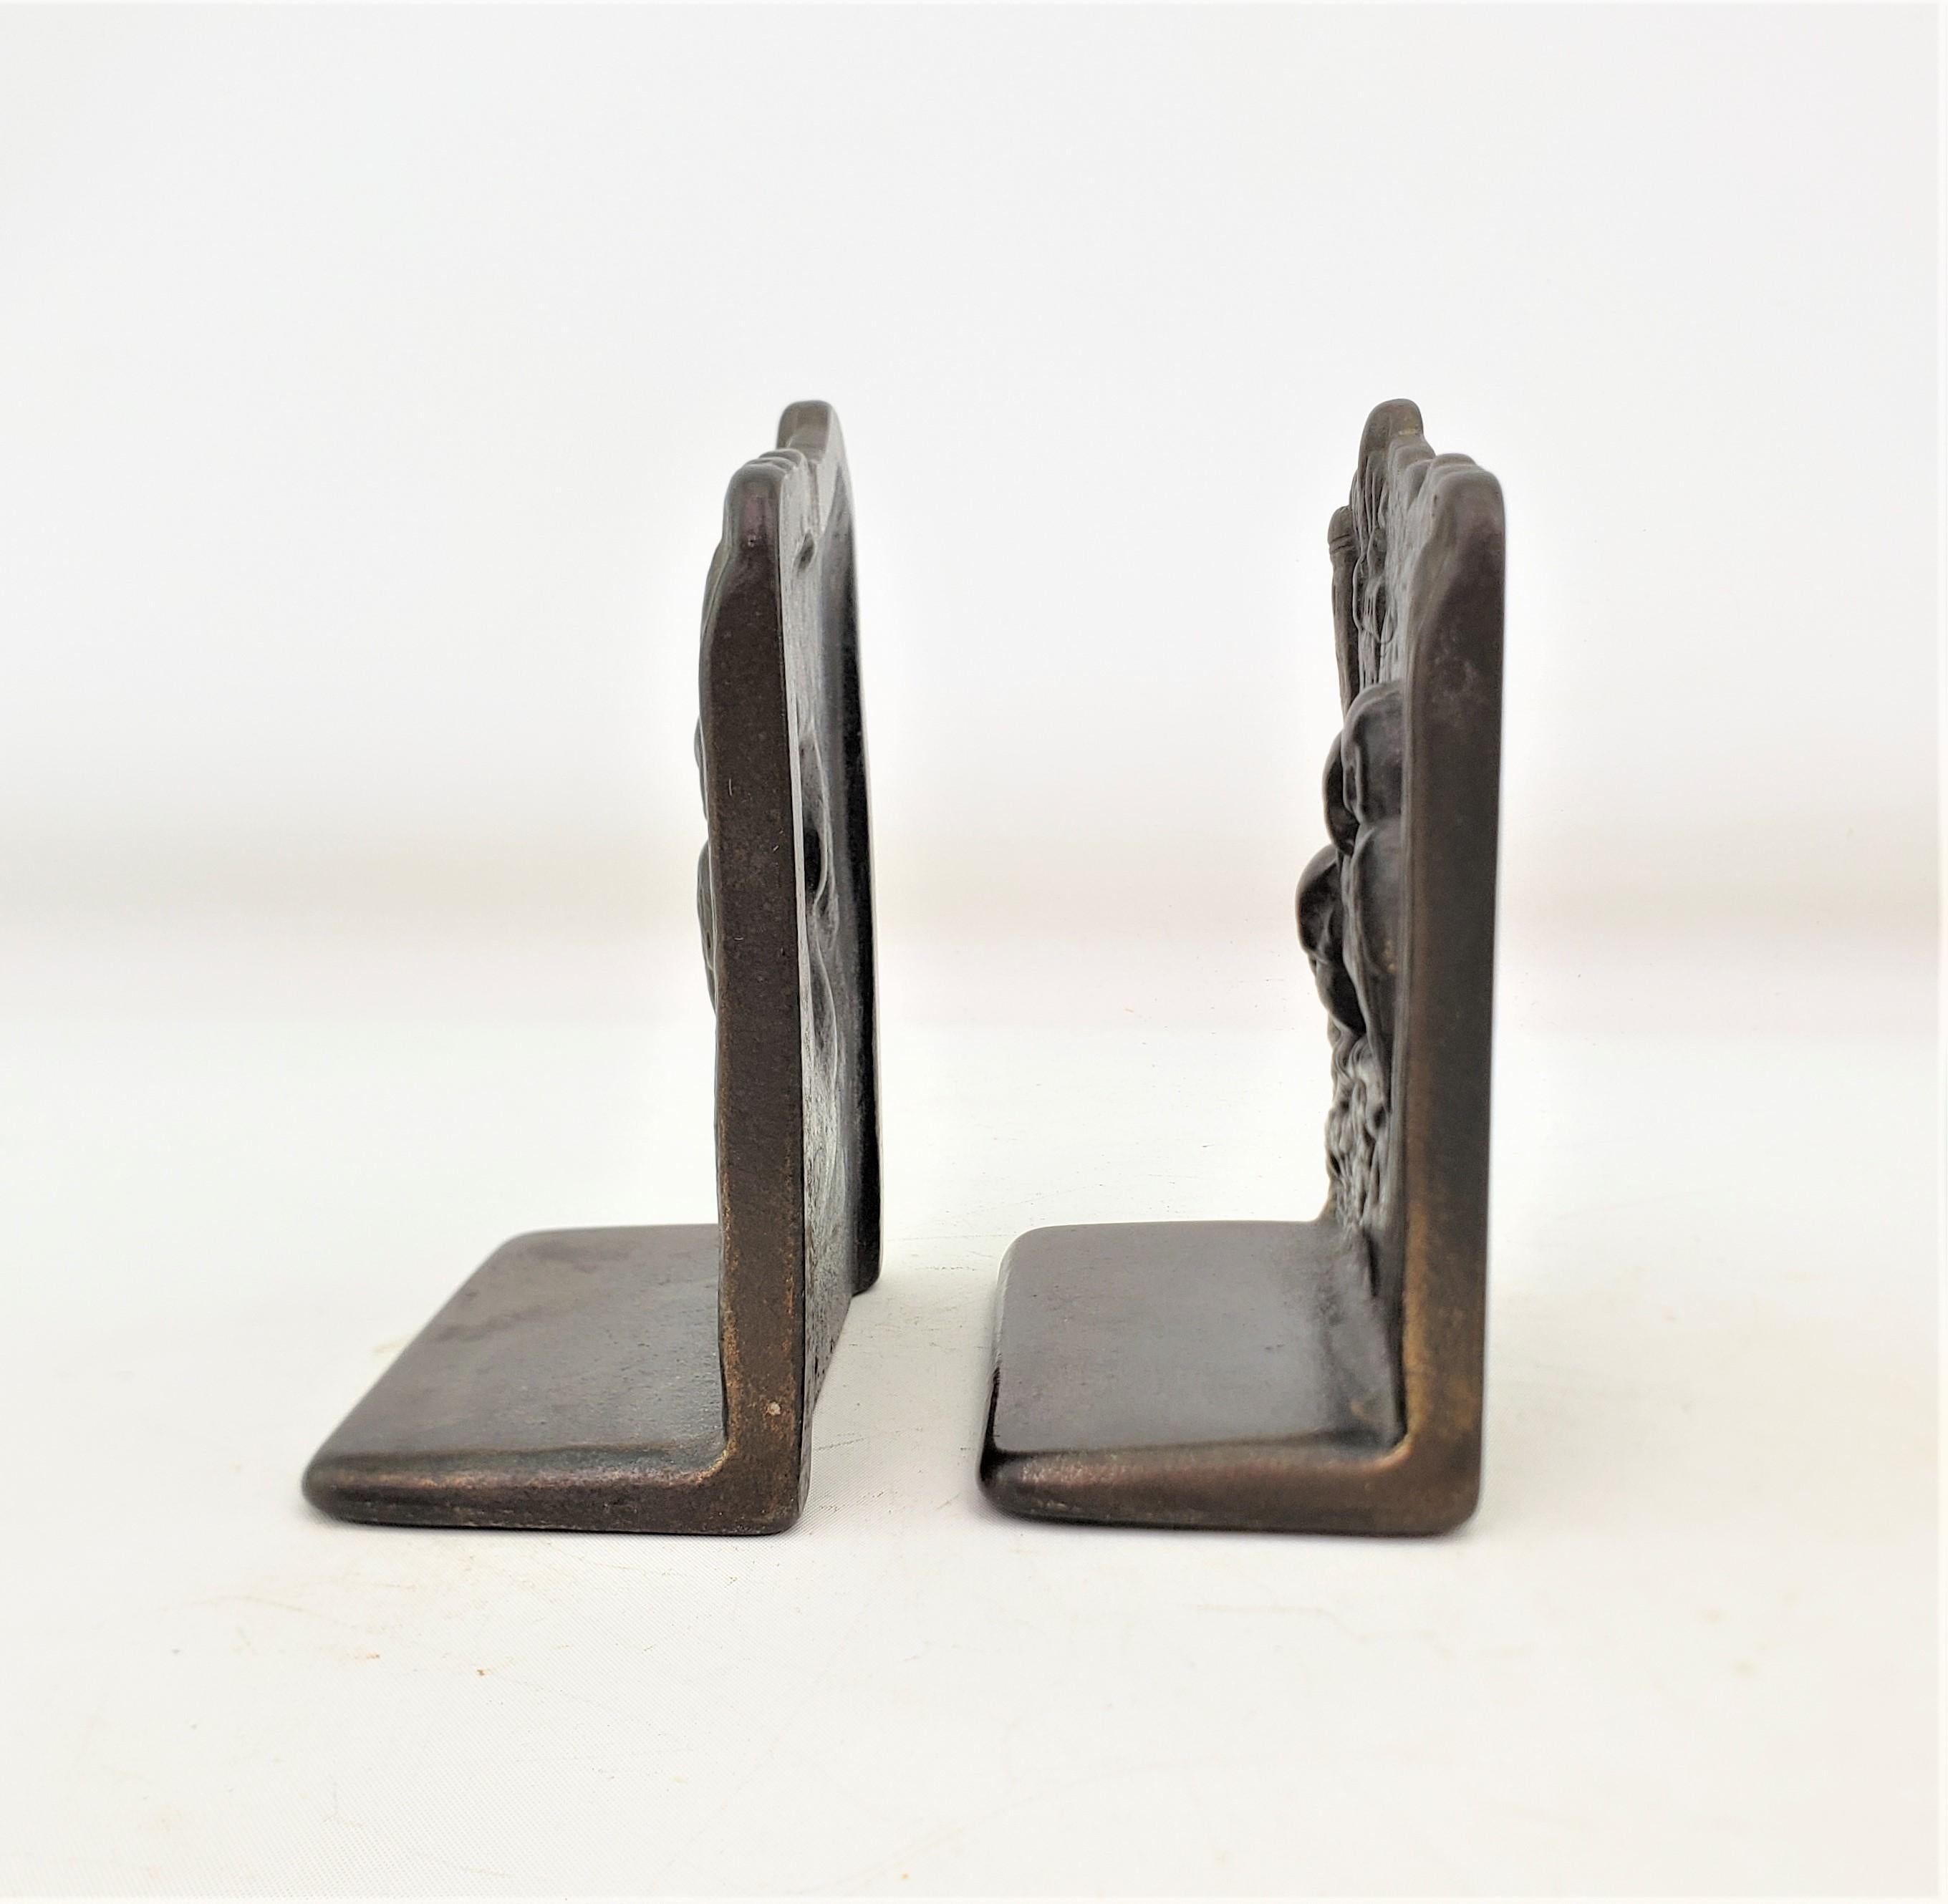 Antique Art Deco Cast & Patinated Bookends Depicting Three Perched Owls In Good Condition For Sale In Hamilton, Ontario